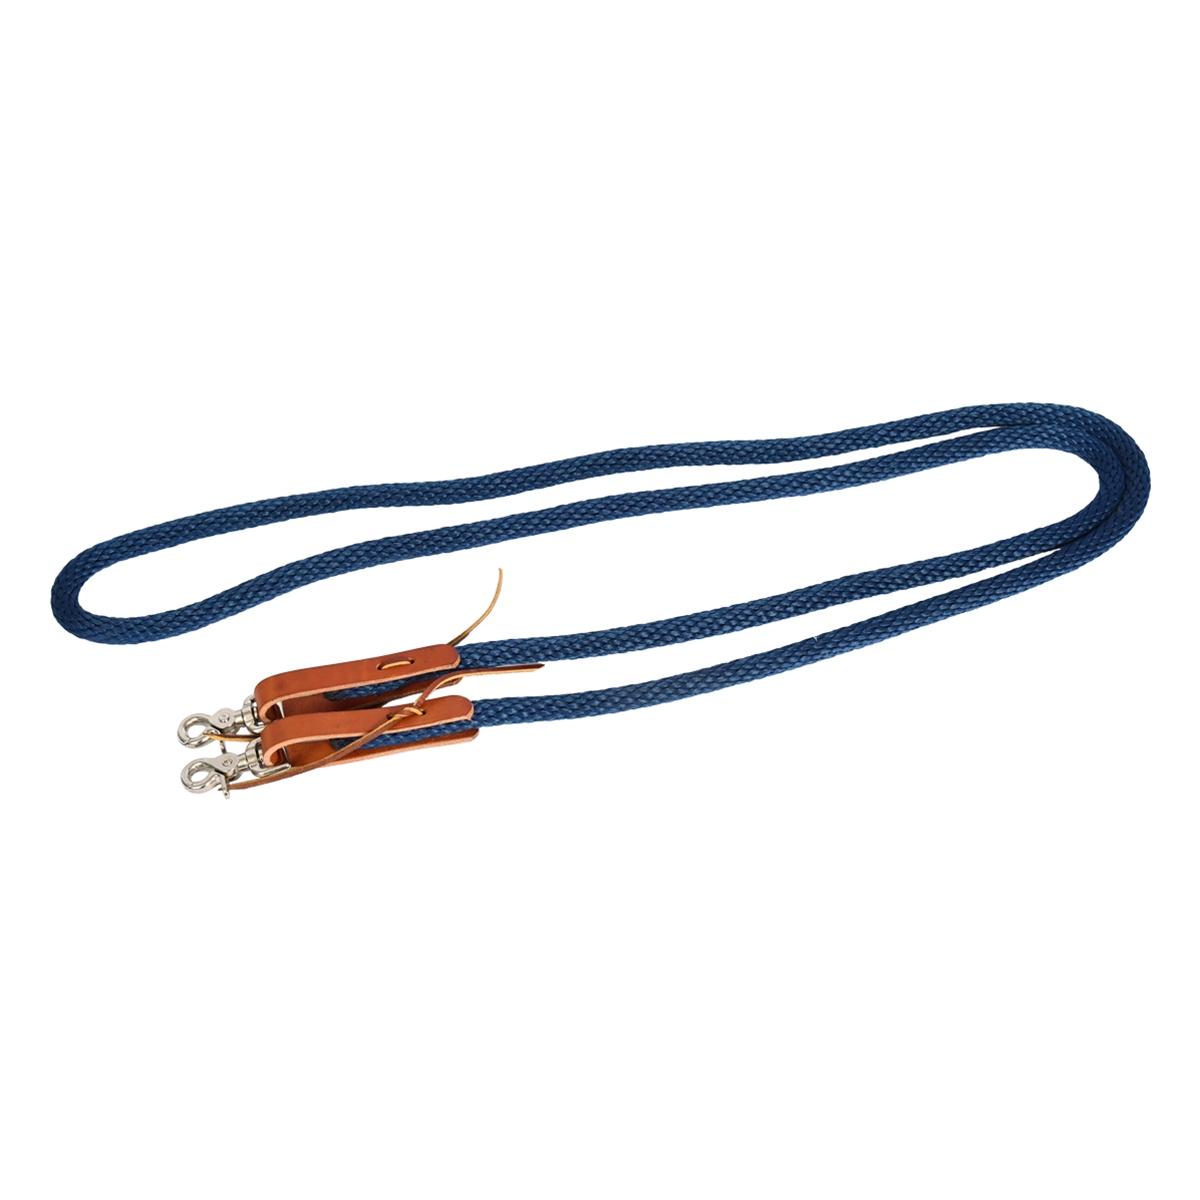 Ravenox Horse Tack Horse Leads | 1-Inch Soft Cotton Rope Royal Blue